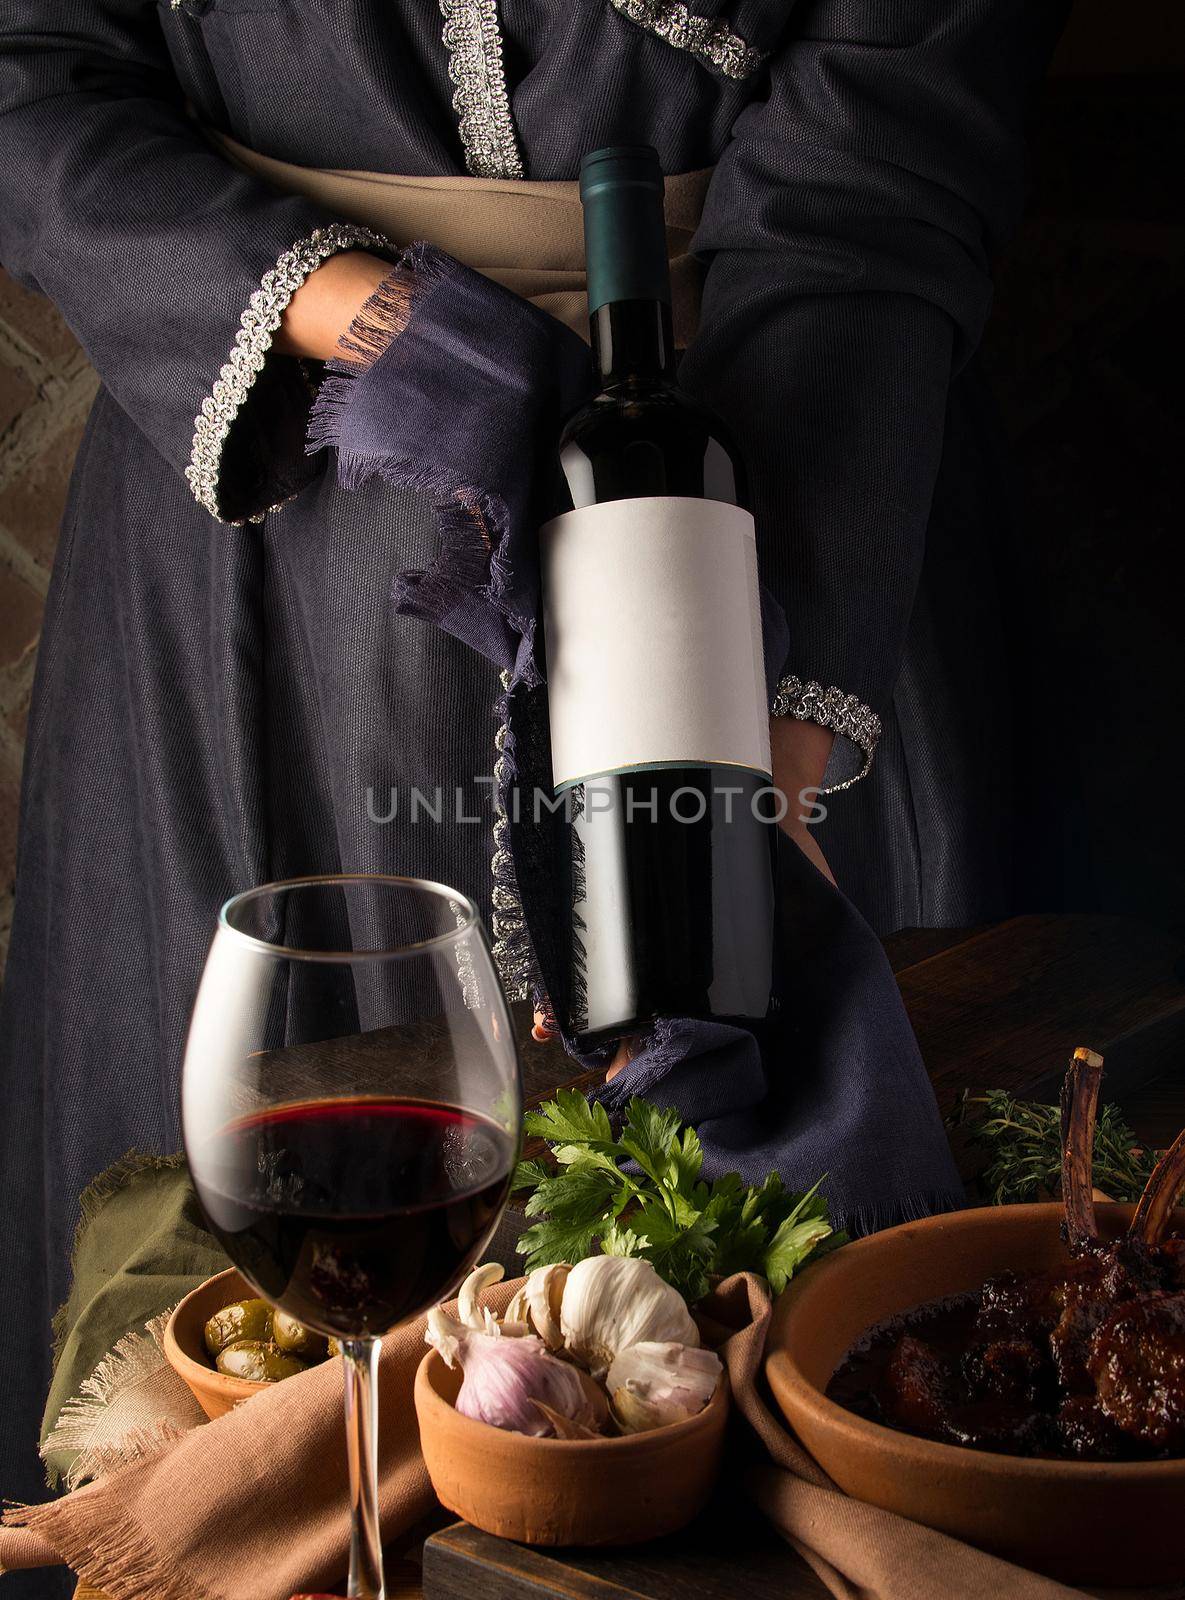 A vertical shot of a person in a traditional costume showing a wine bottle